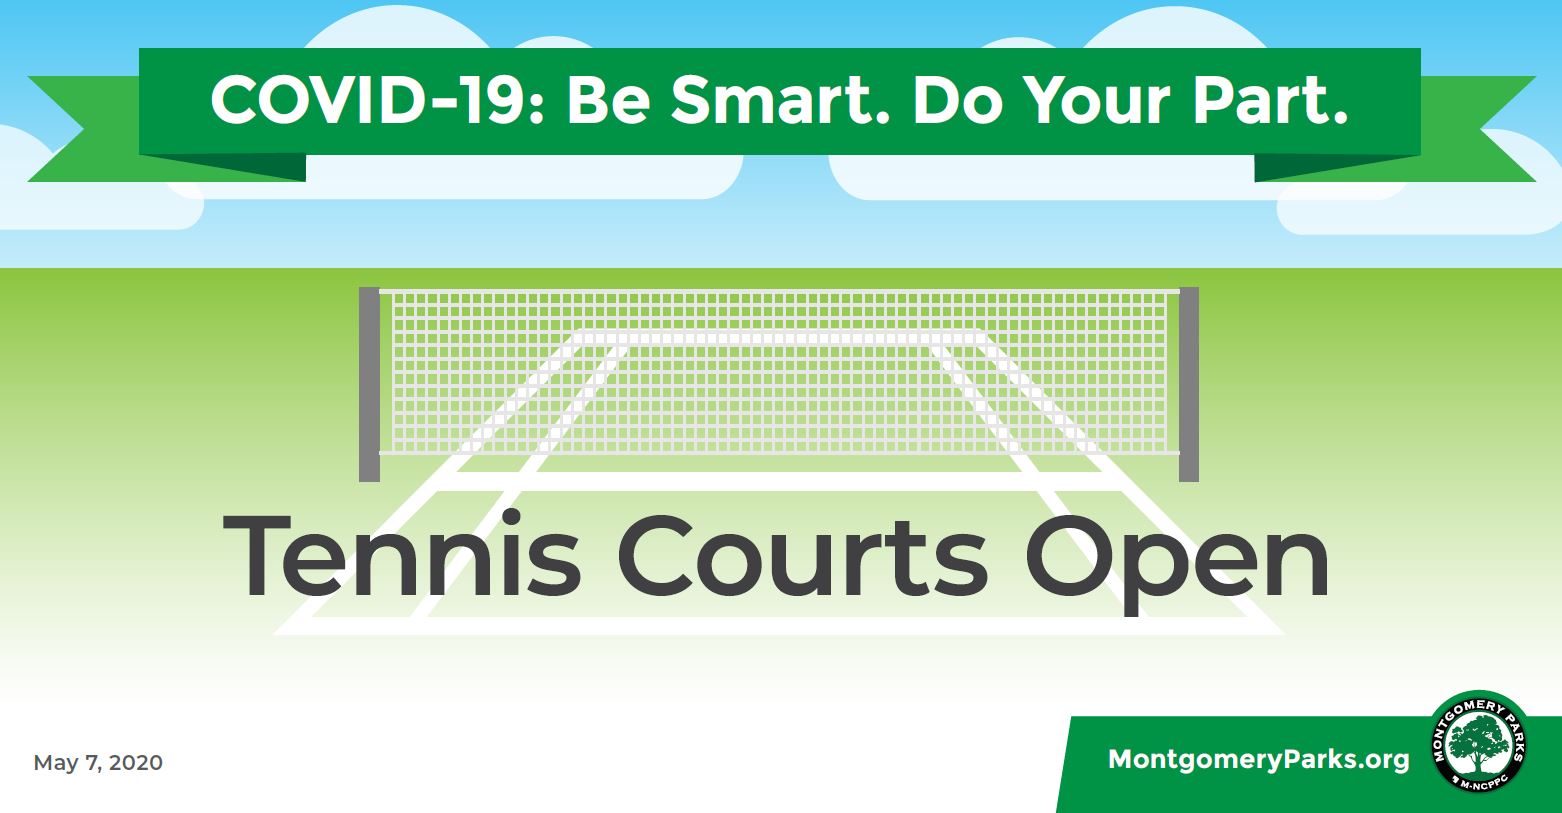 Tennis court with text: Tennis Courts Open.